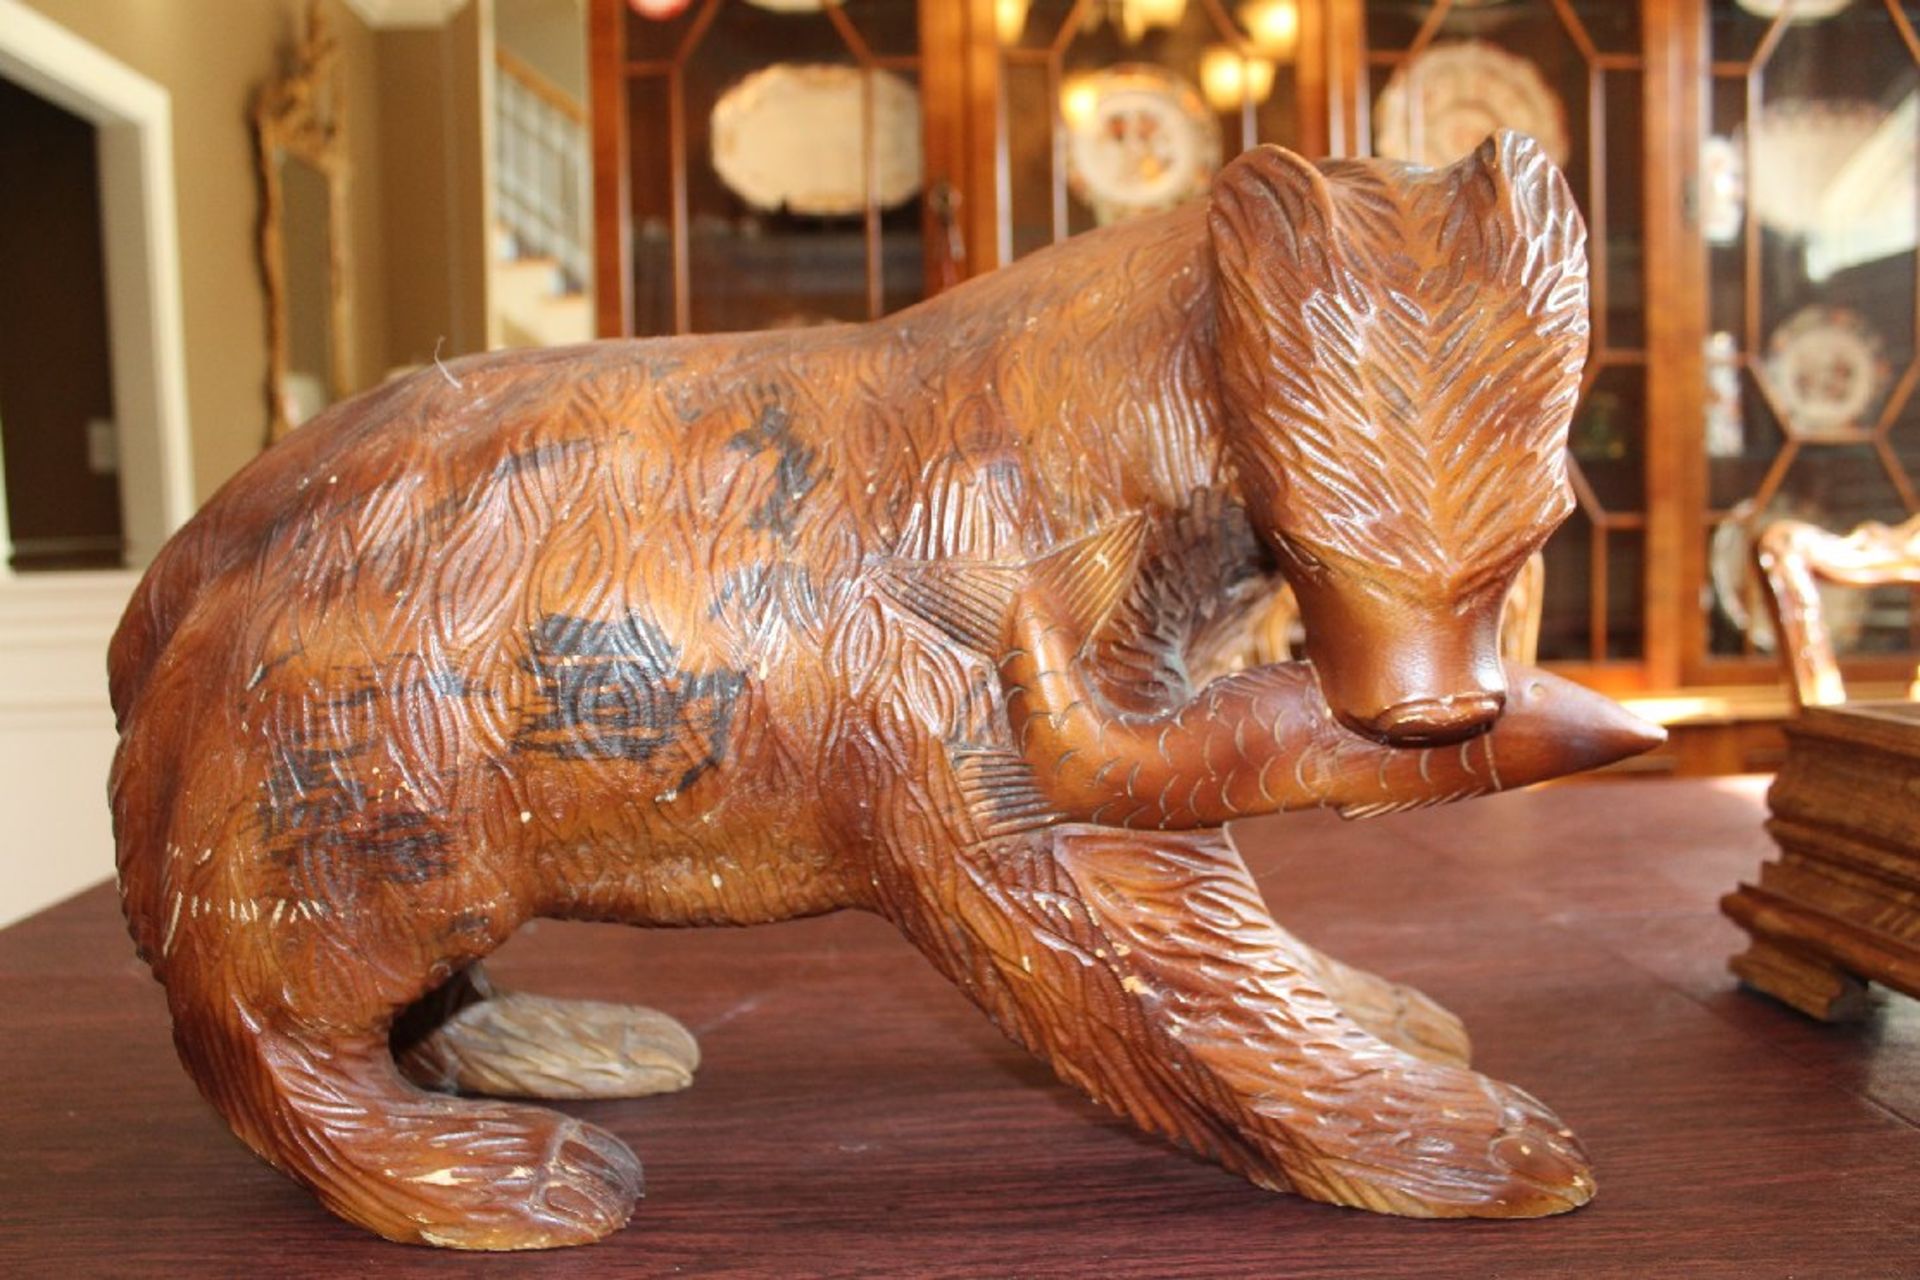 Carved Wooden Bear with Salmon in Mouth, Wooden Flatware Box, Pentax Camera